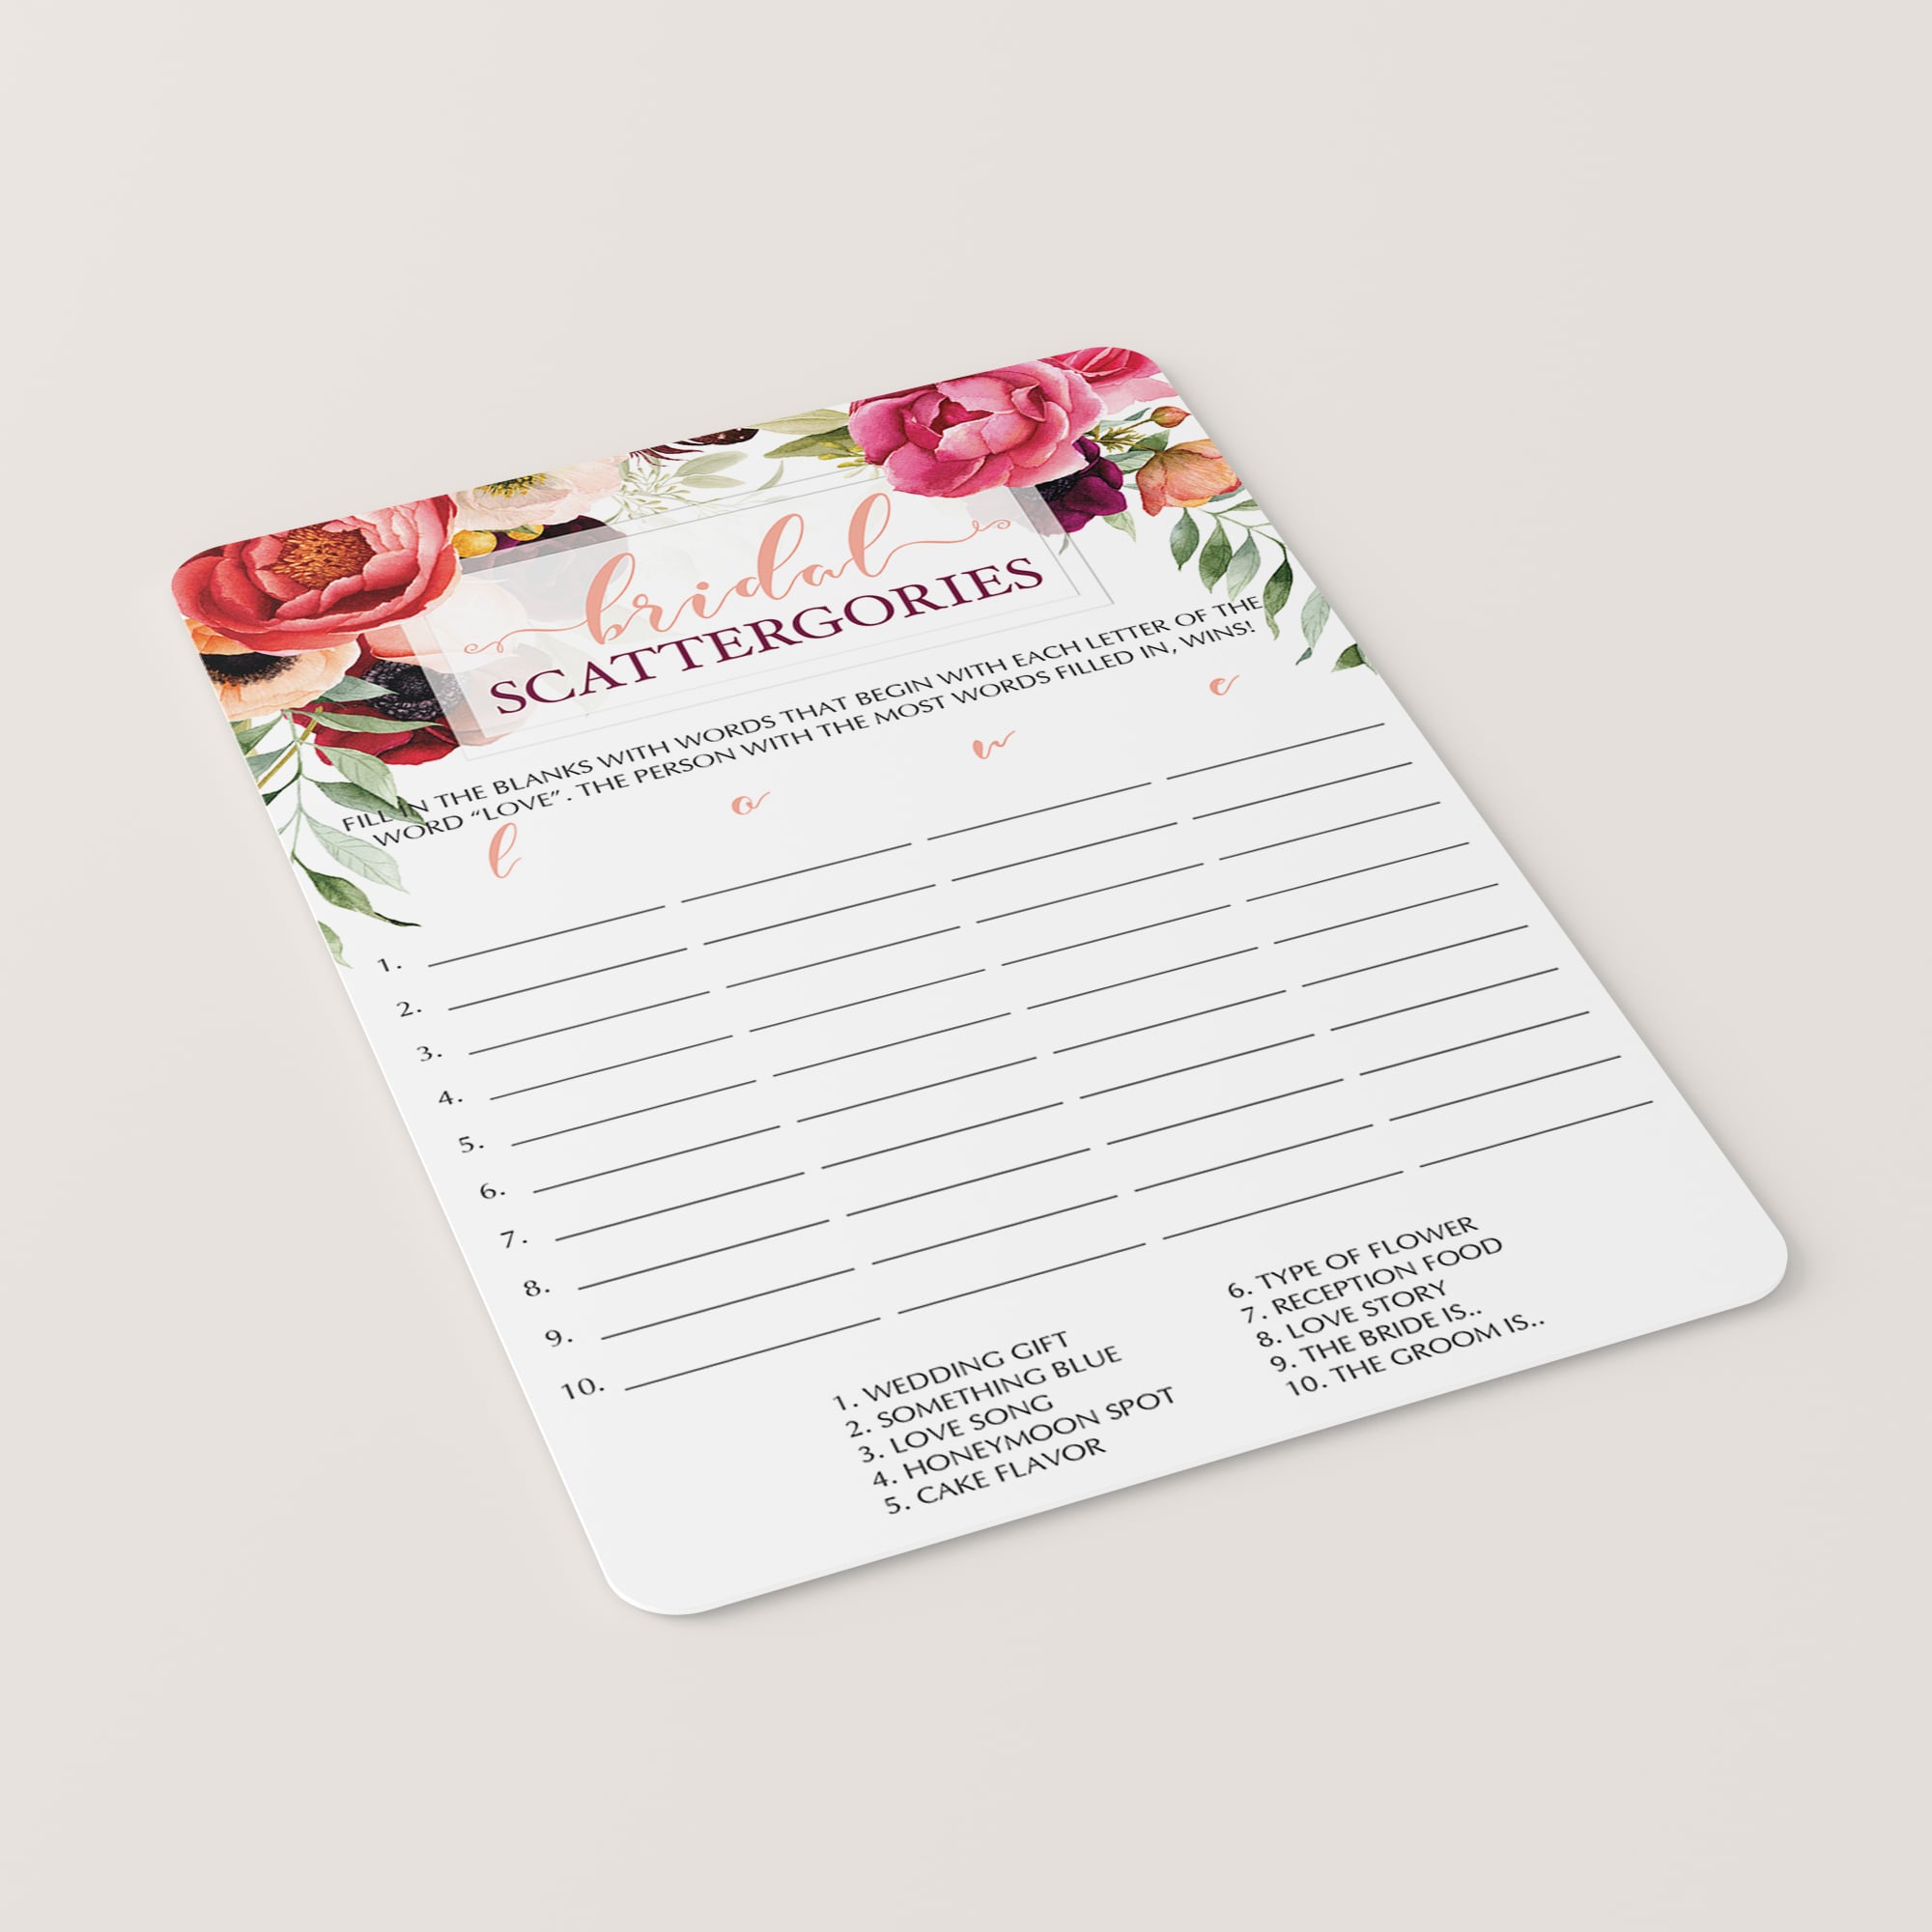 Pink and red bridal shower game scattergories printable by LittleSizzle